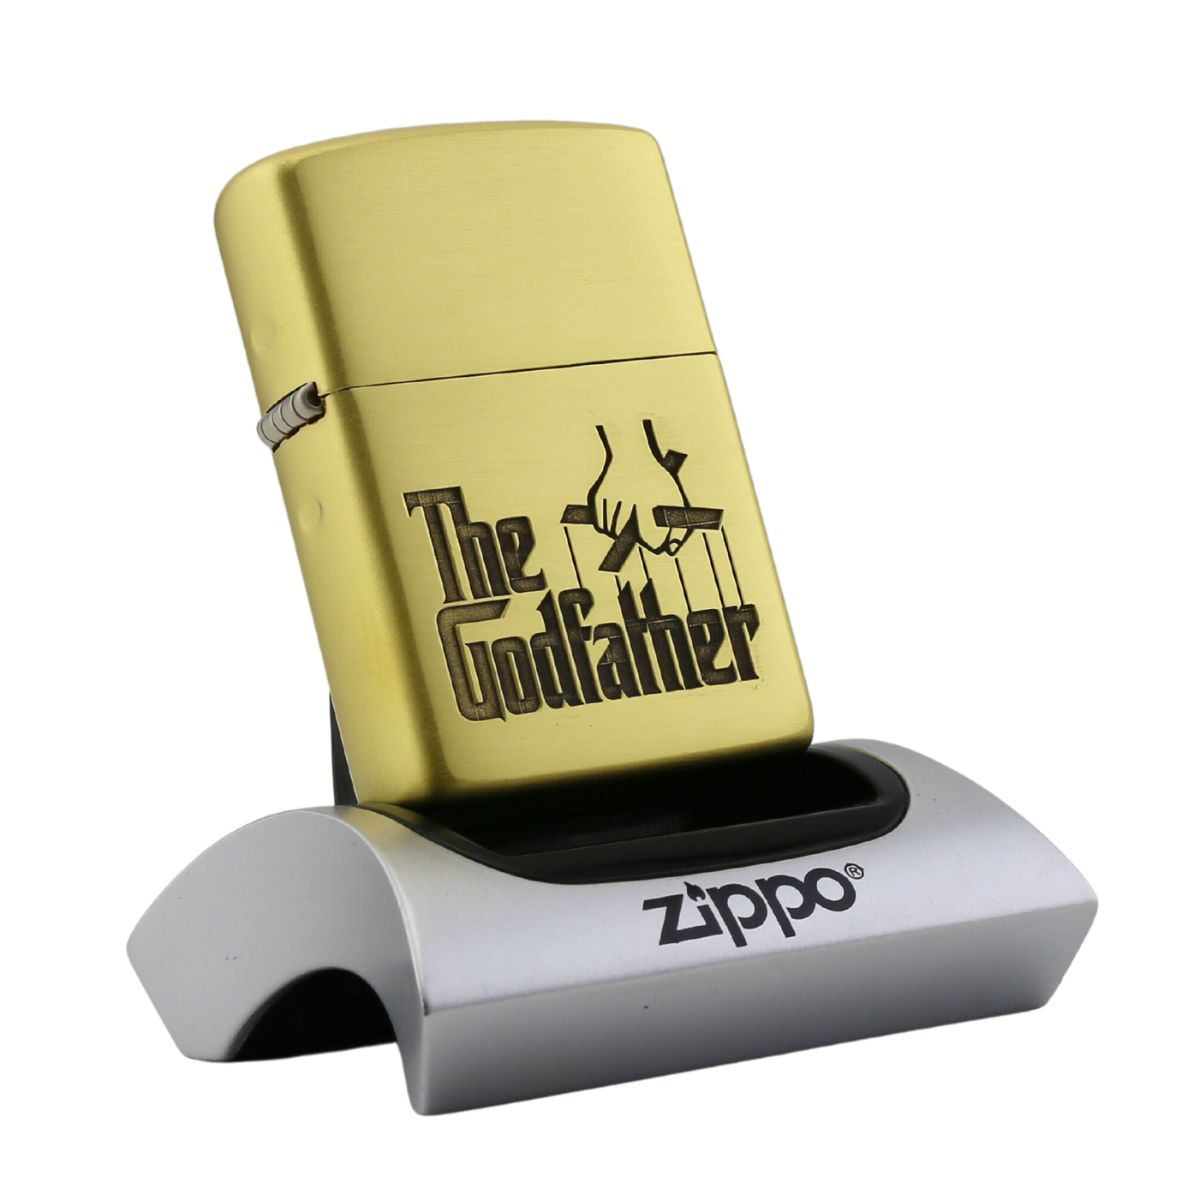 zippo-bo-gia-dong-khoi-vo-day-the-god-father-cao-cap